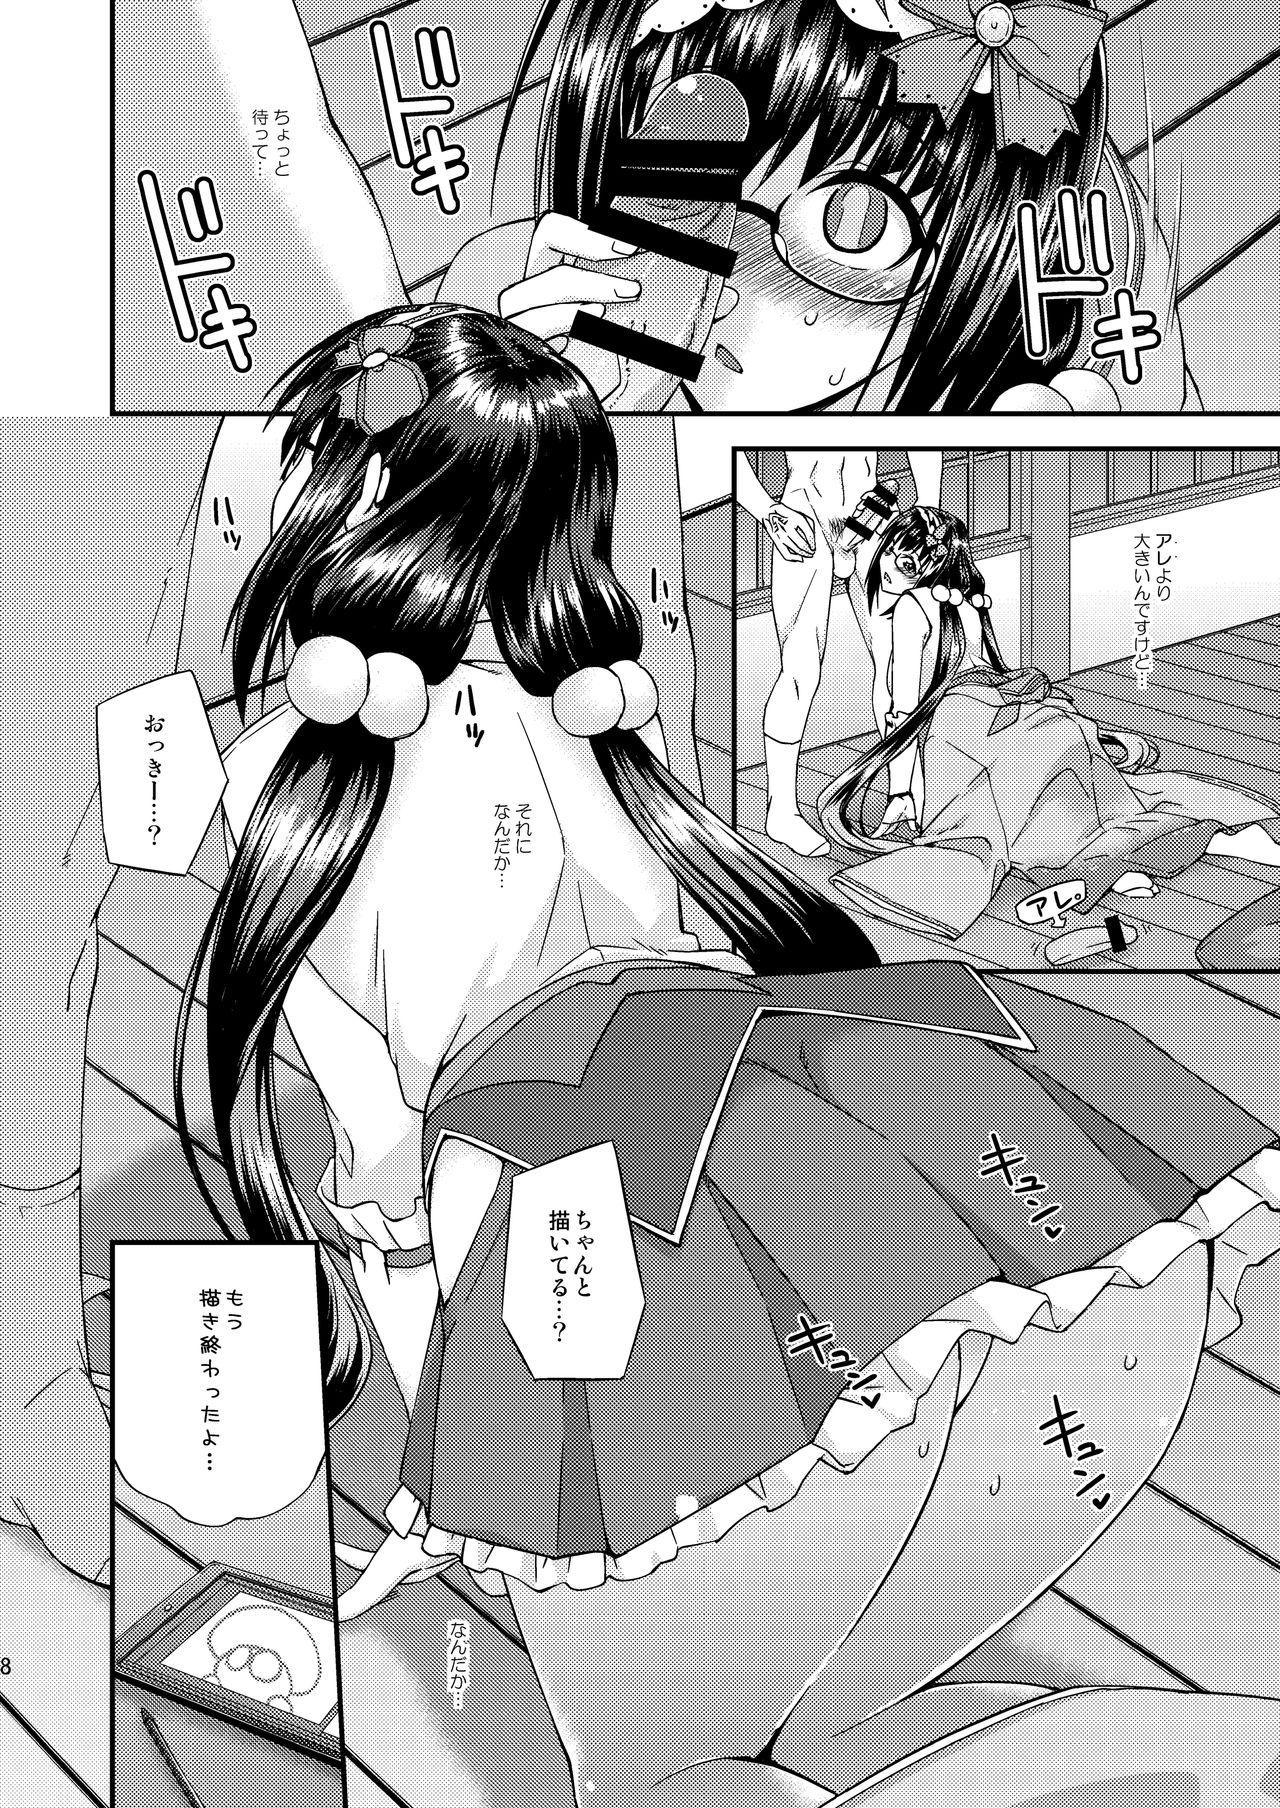 Licking Osakabehime no Iutoori - Fate grand order Young Tits - Page 7